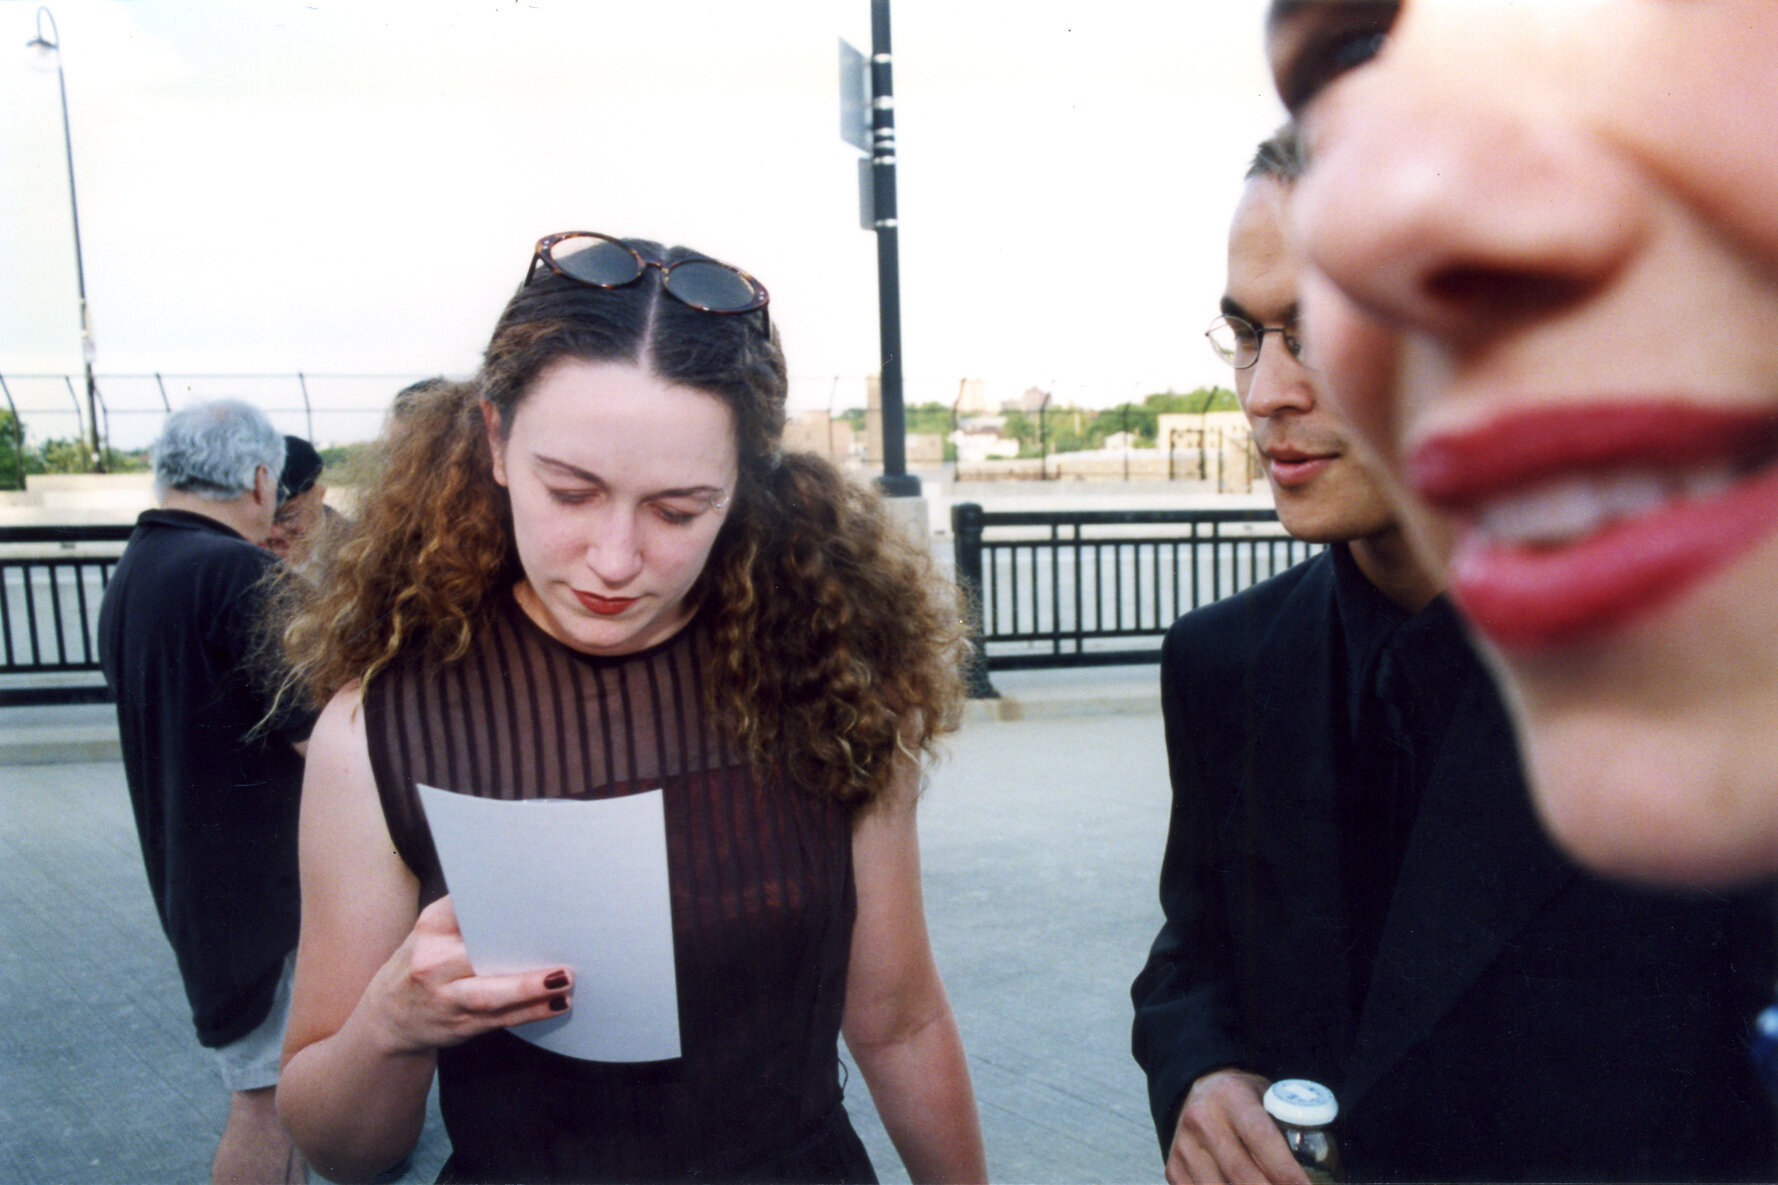 Woman with brown curly hair held back by sunglasses wearing black dress reads pamphlet.